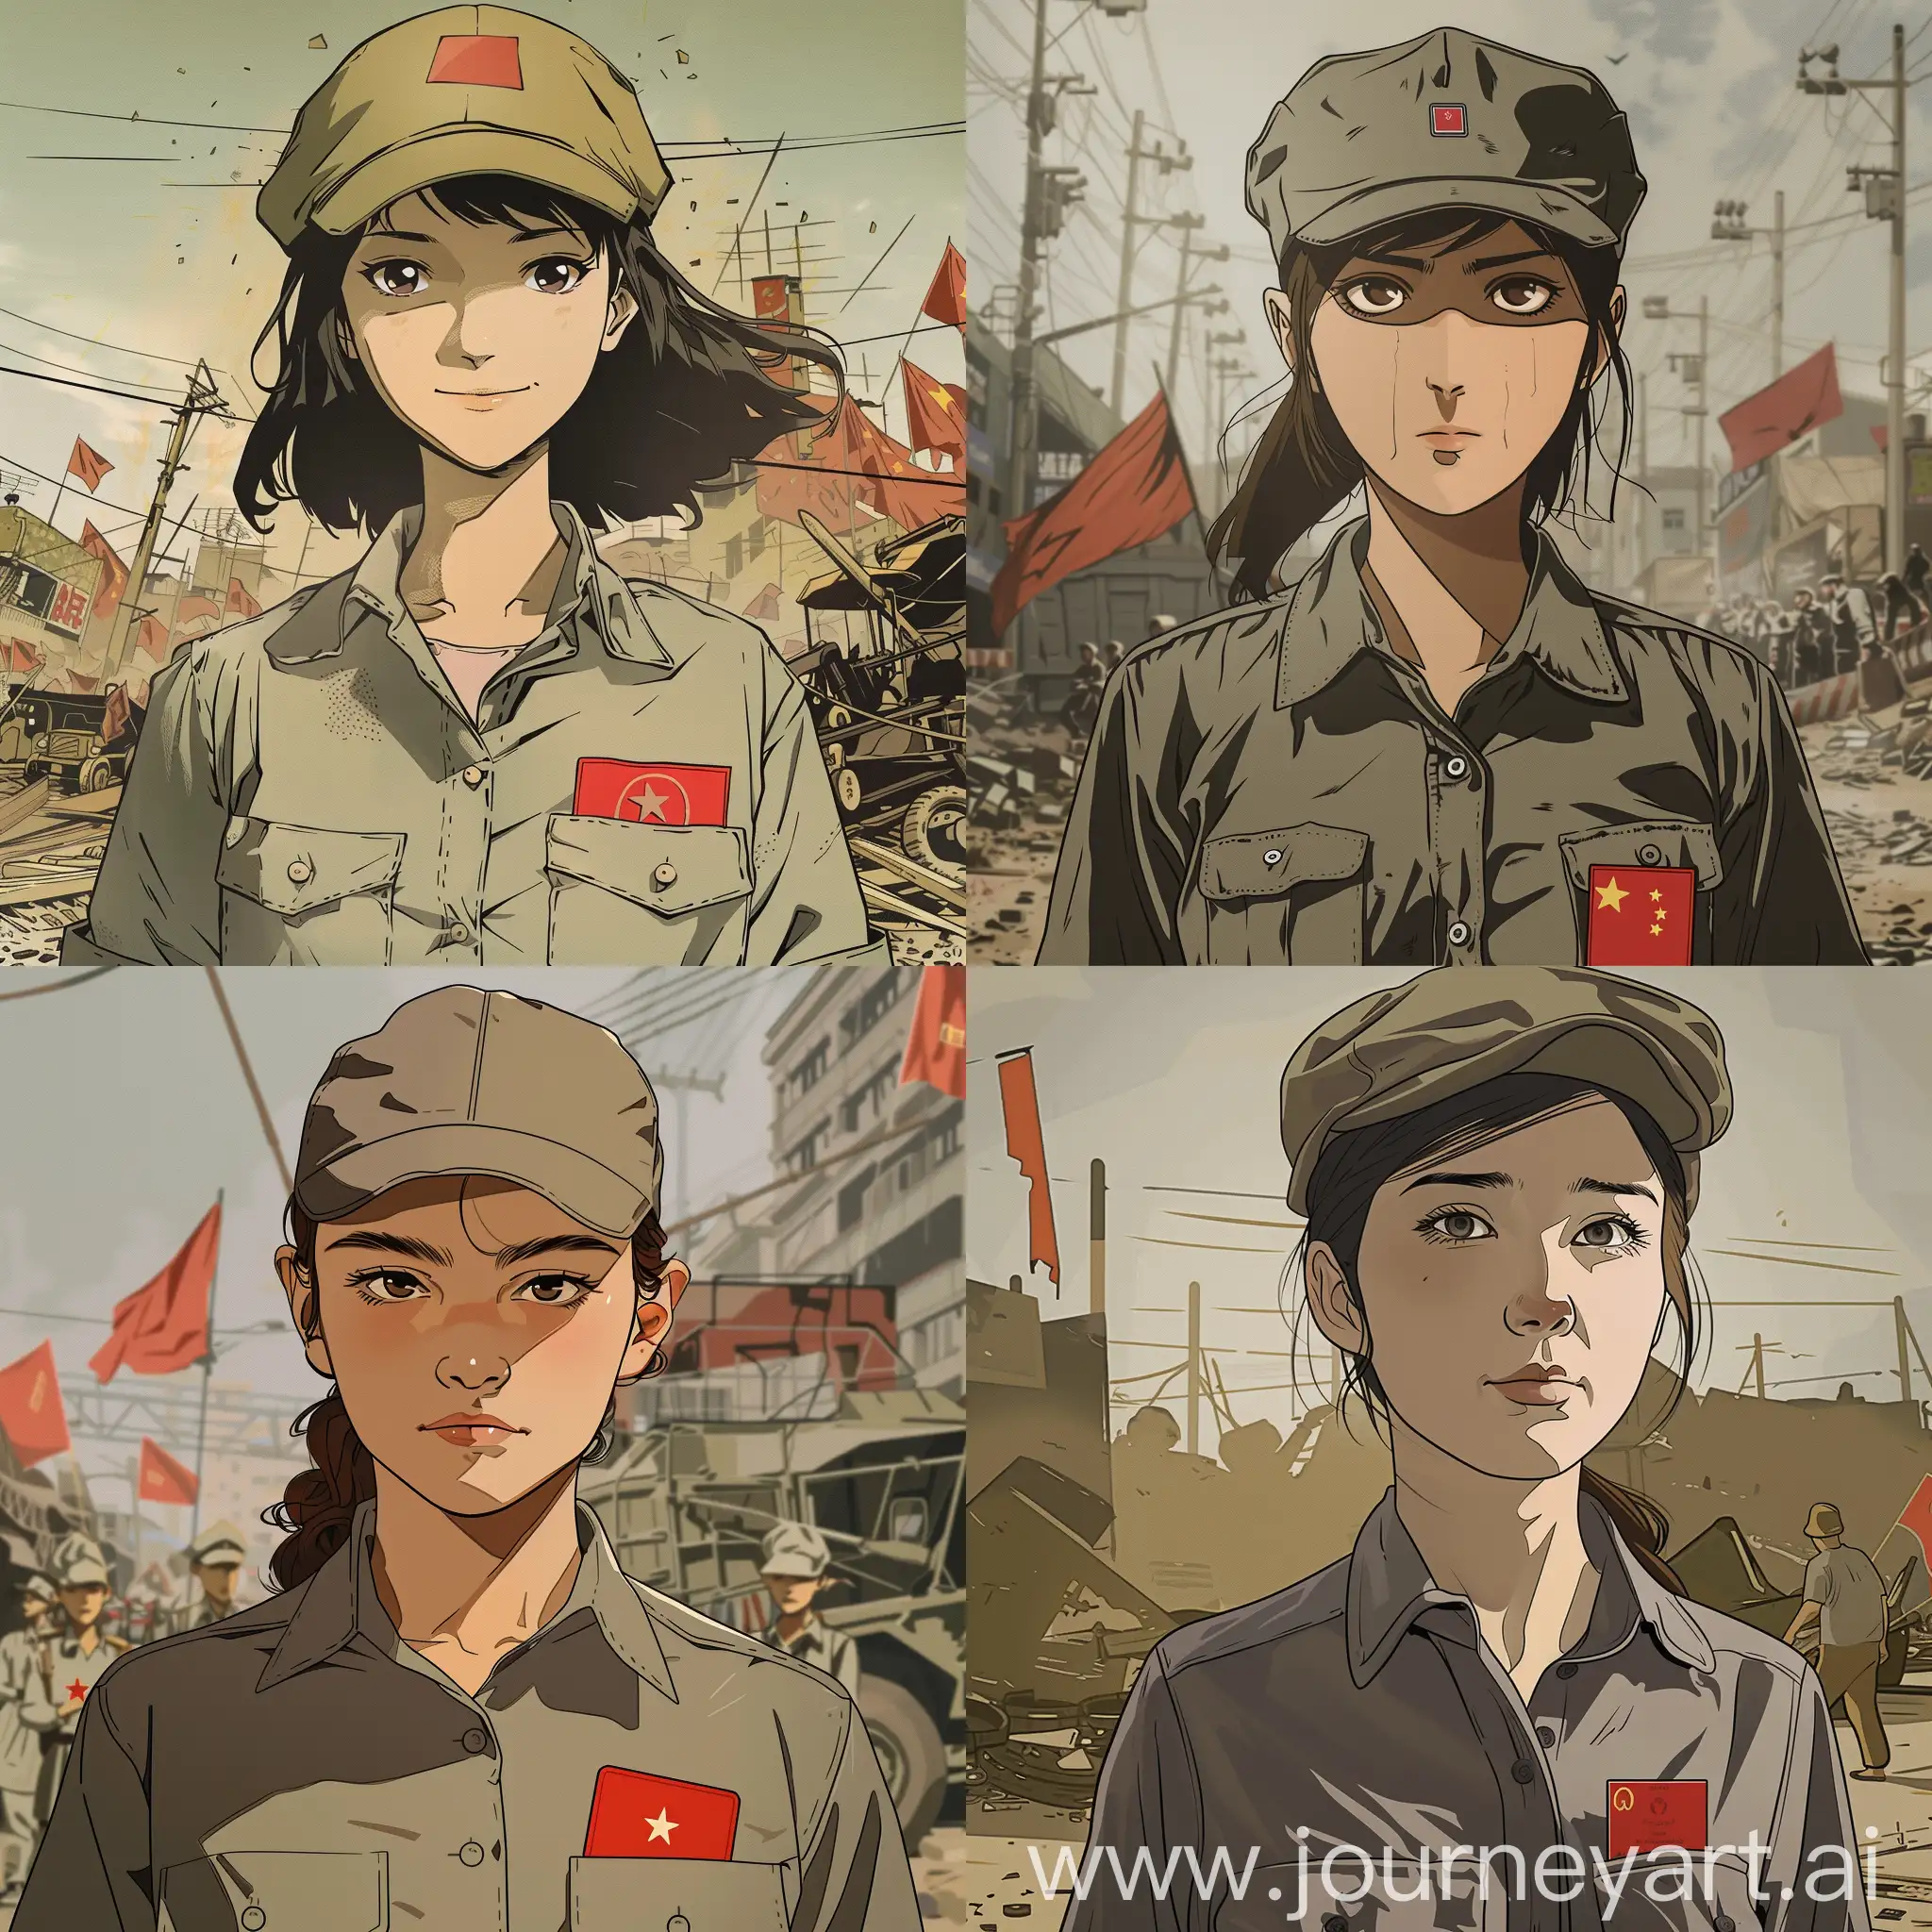 A communist woman in a proletarian cap, in simple, no-frills clothes, a red party card is slightly visible in her shirt pocket, her face is calm. There is a workers' strike in the background, without bright flags or posters. Anime style